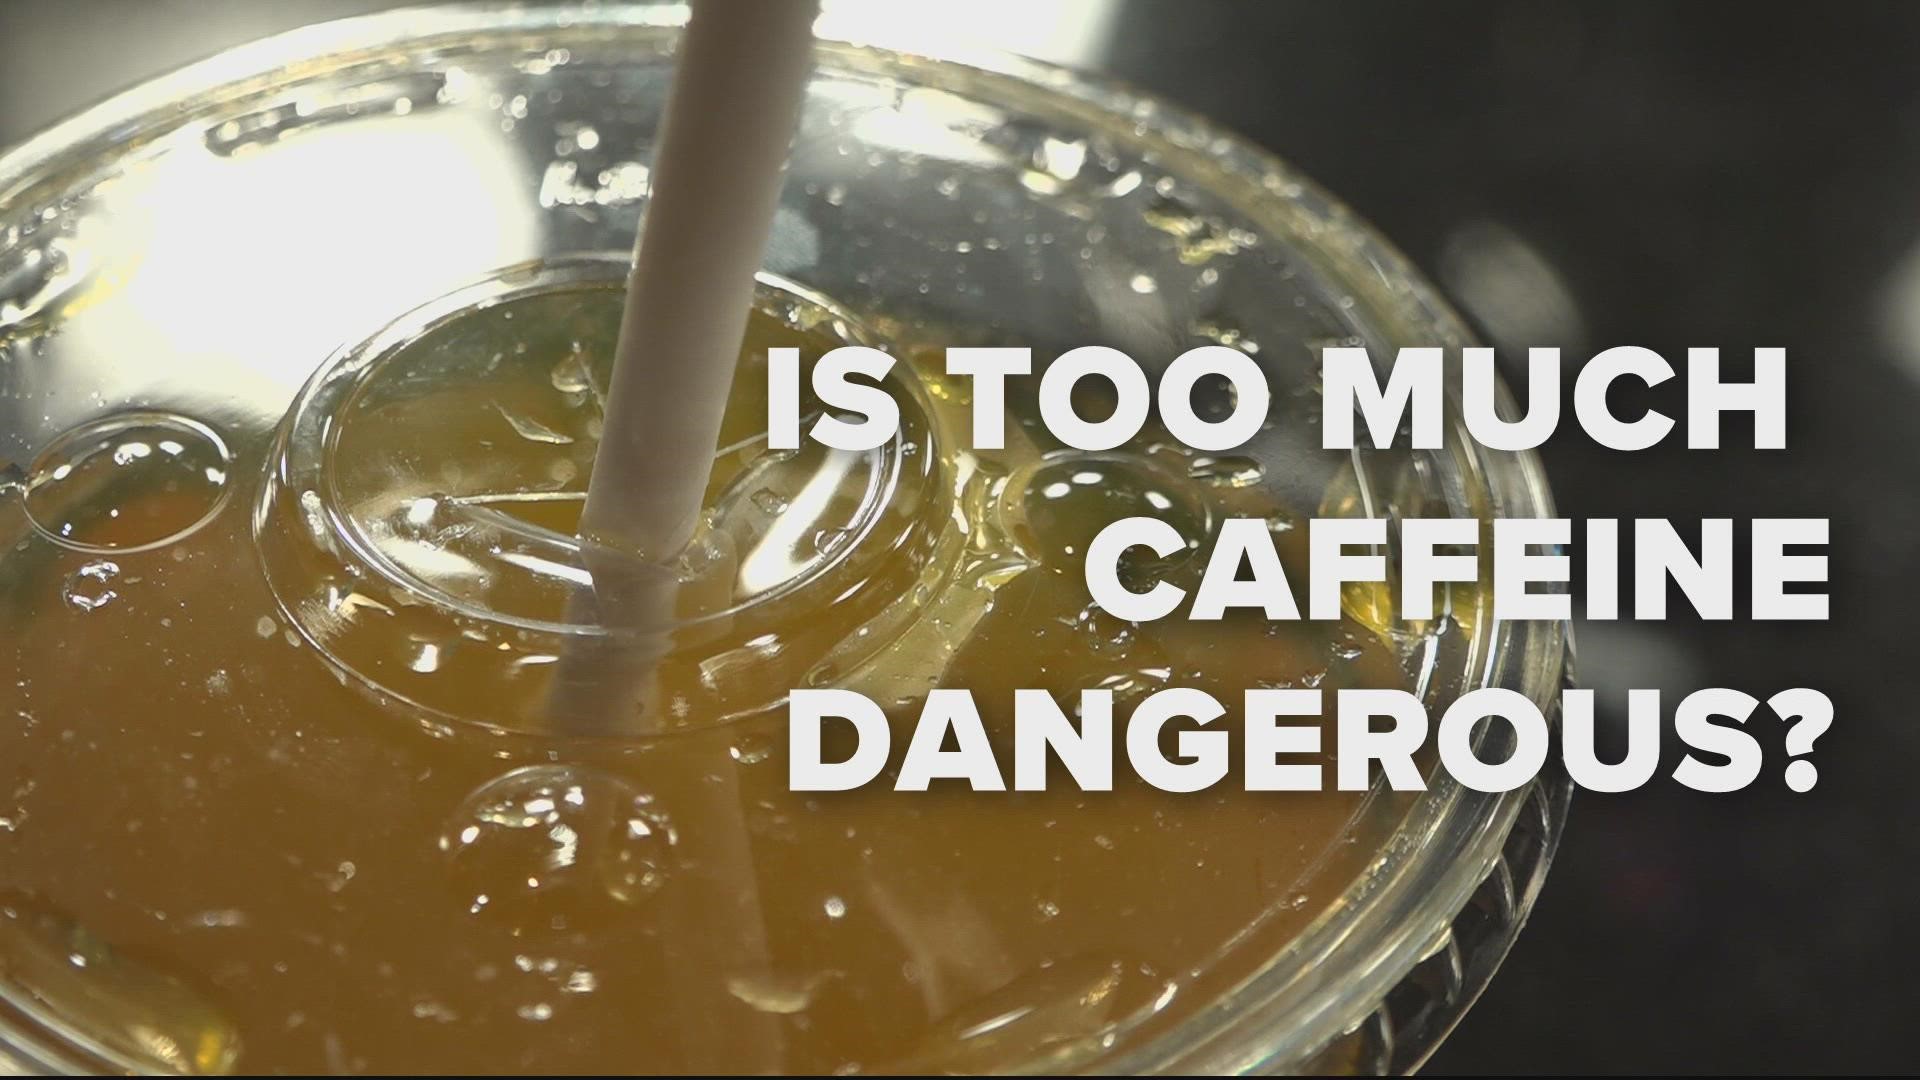 A video that went viral this week on Twitter and TikTok has users thinking twice about the amount of caffeine they’re drinking.